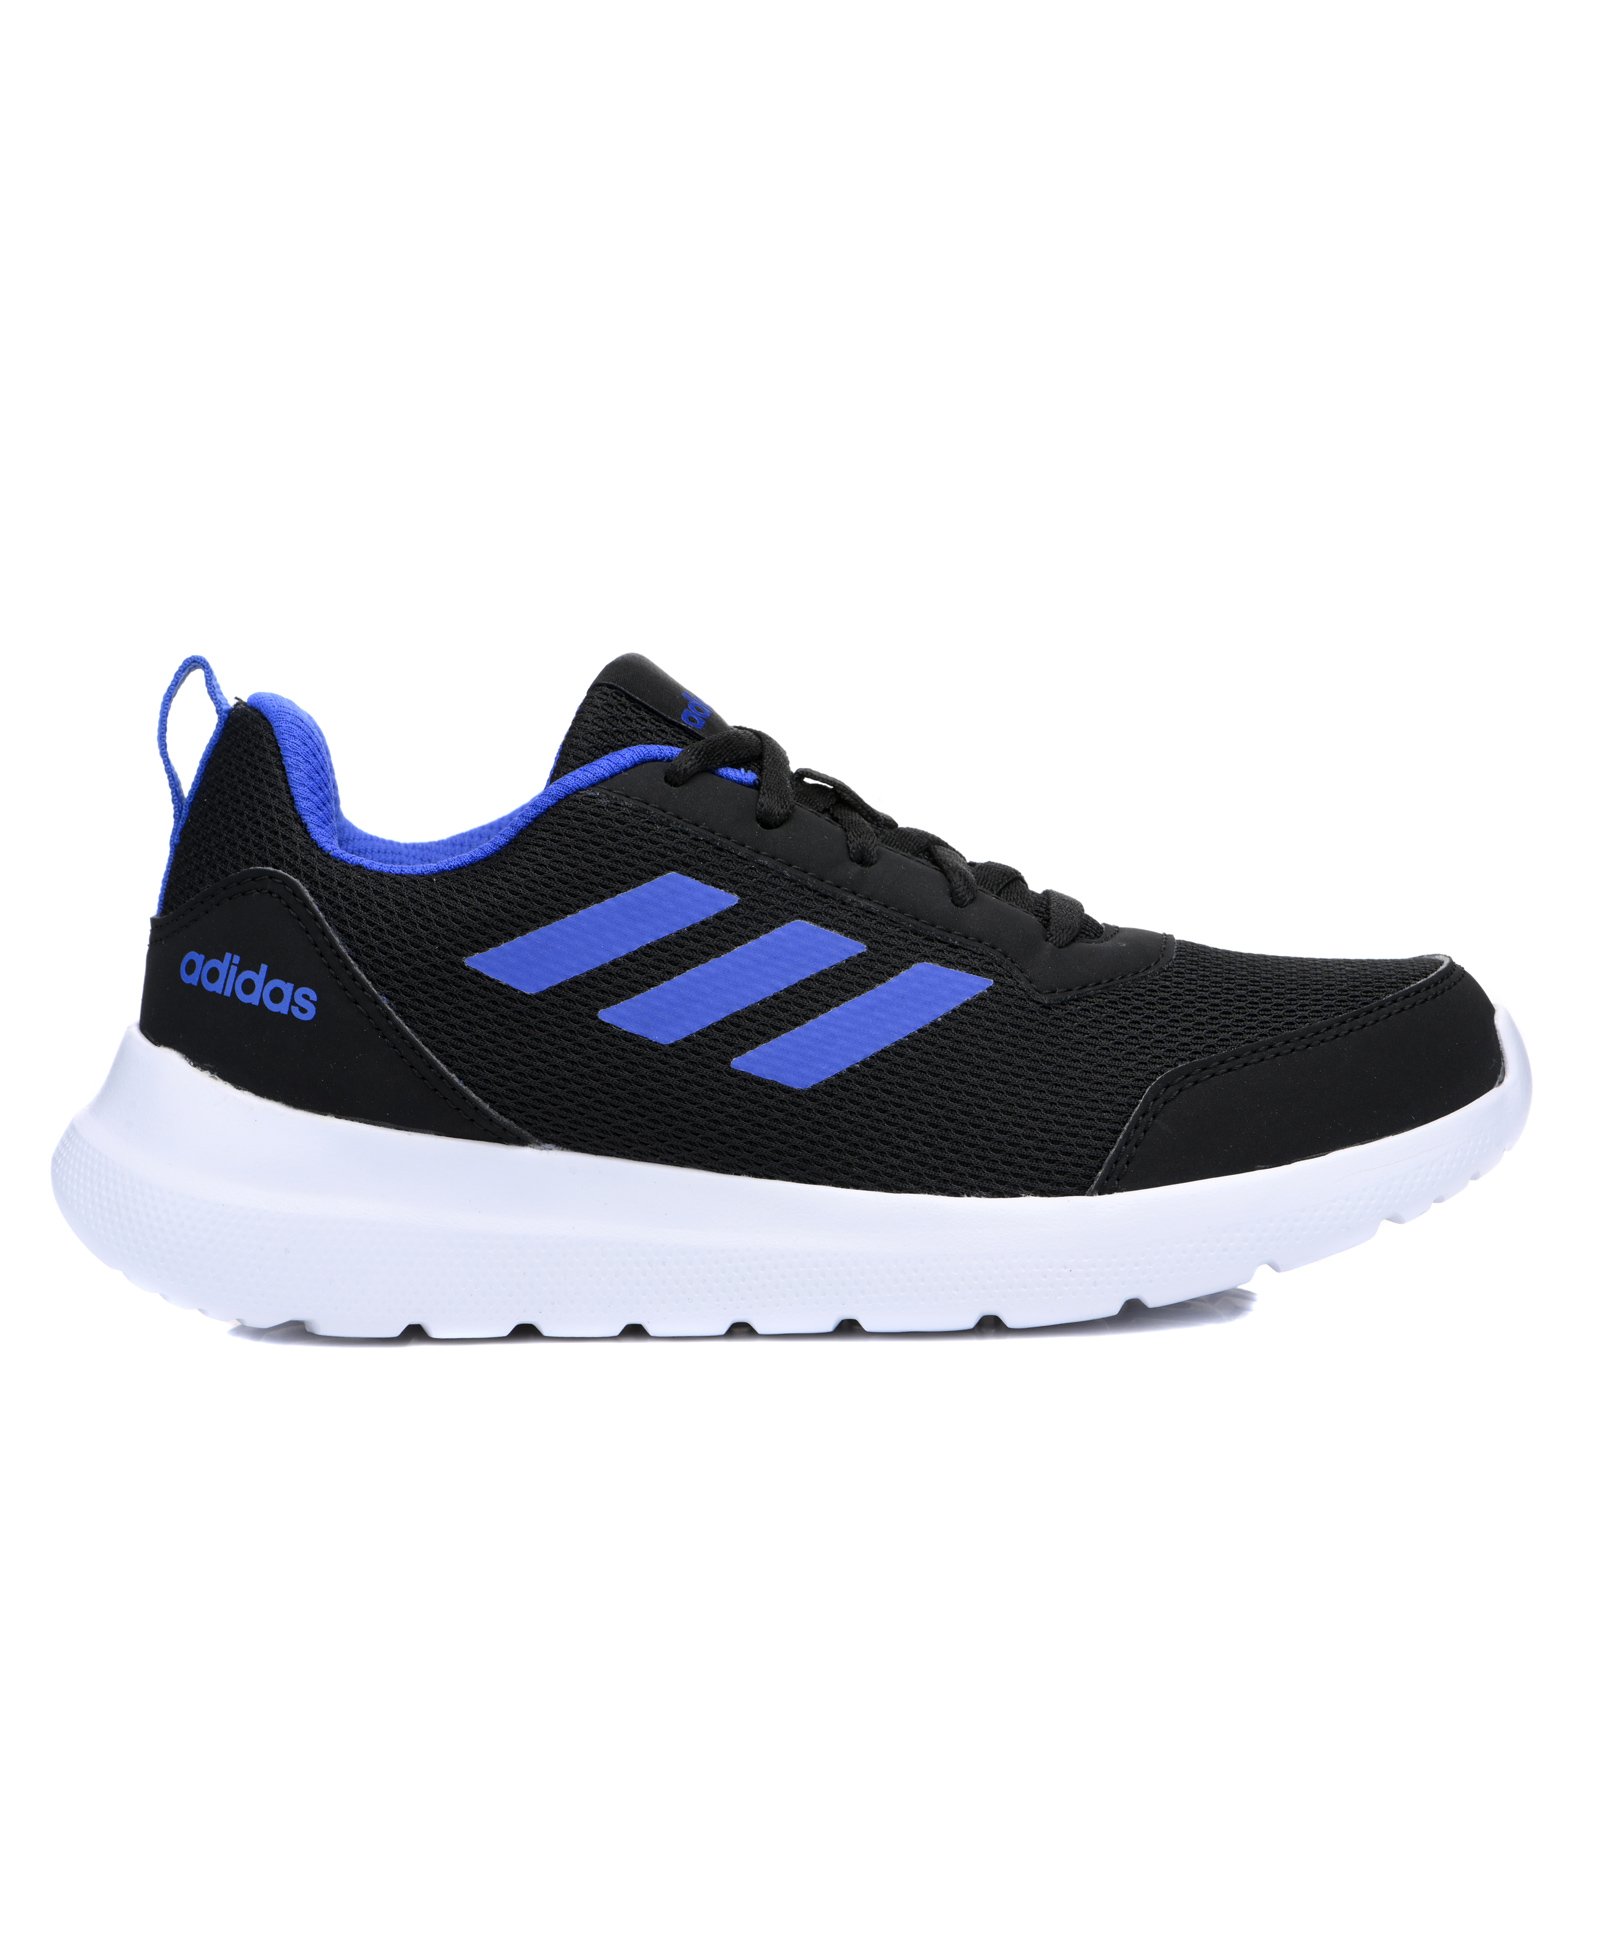 Buy Adidas Kids Adi Ease 1.0 K Velcro Closure Sports Shoes C Black Sonink for Both (6-7 Years) Online, Shop at FirstCry.com - 12290195